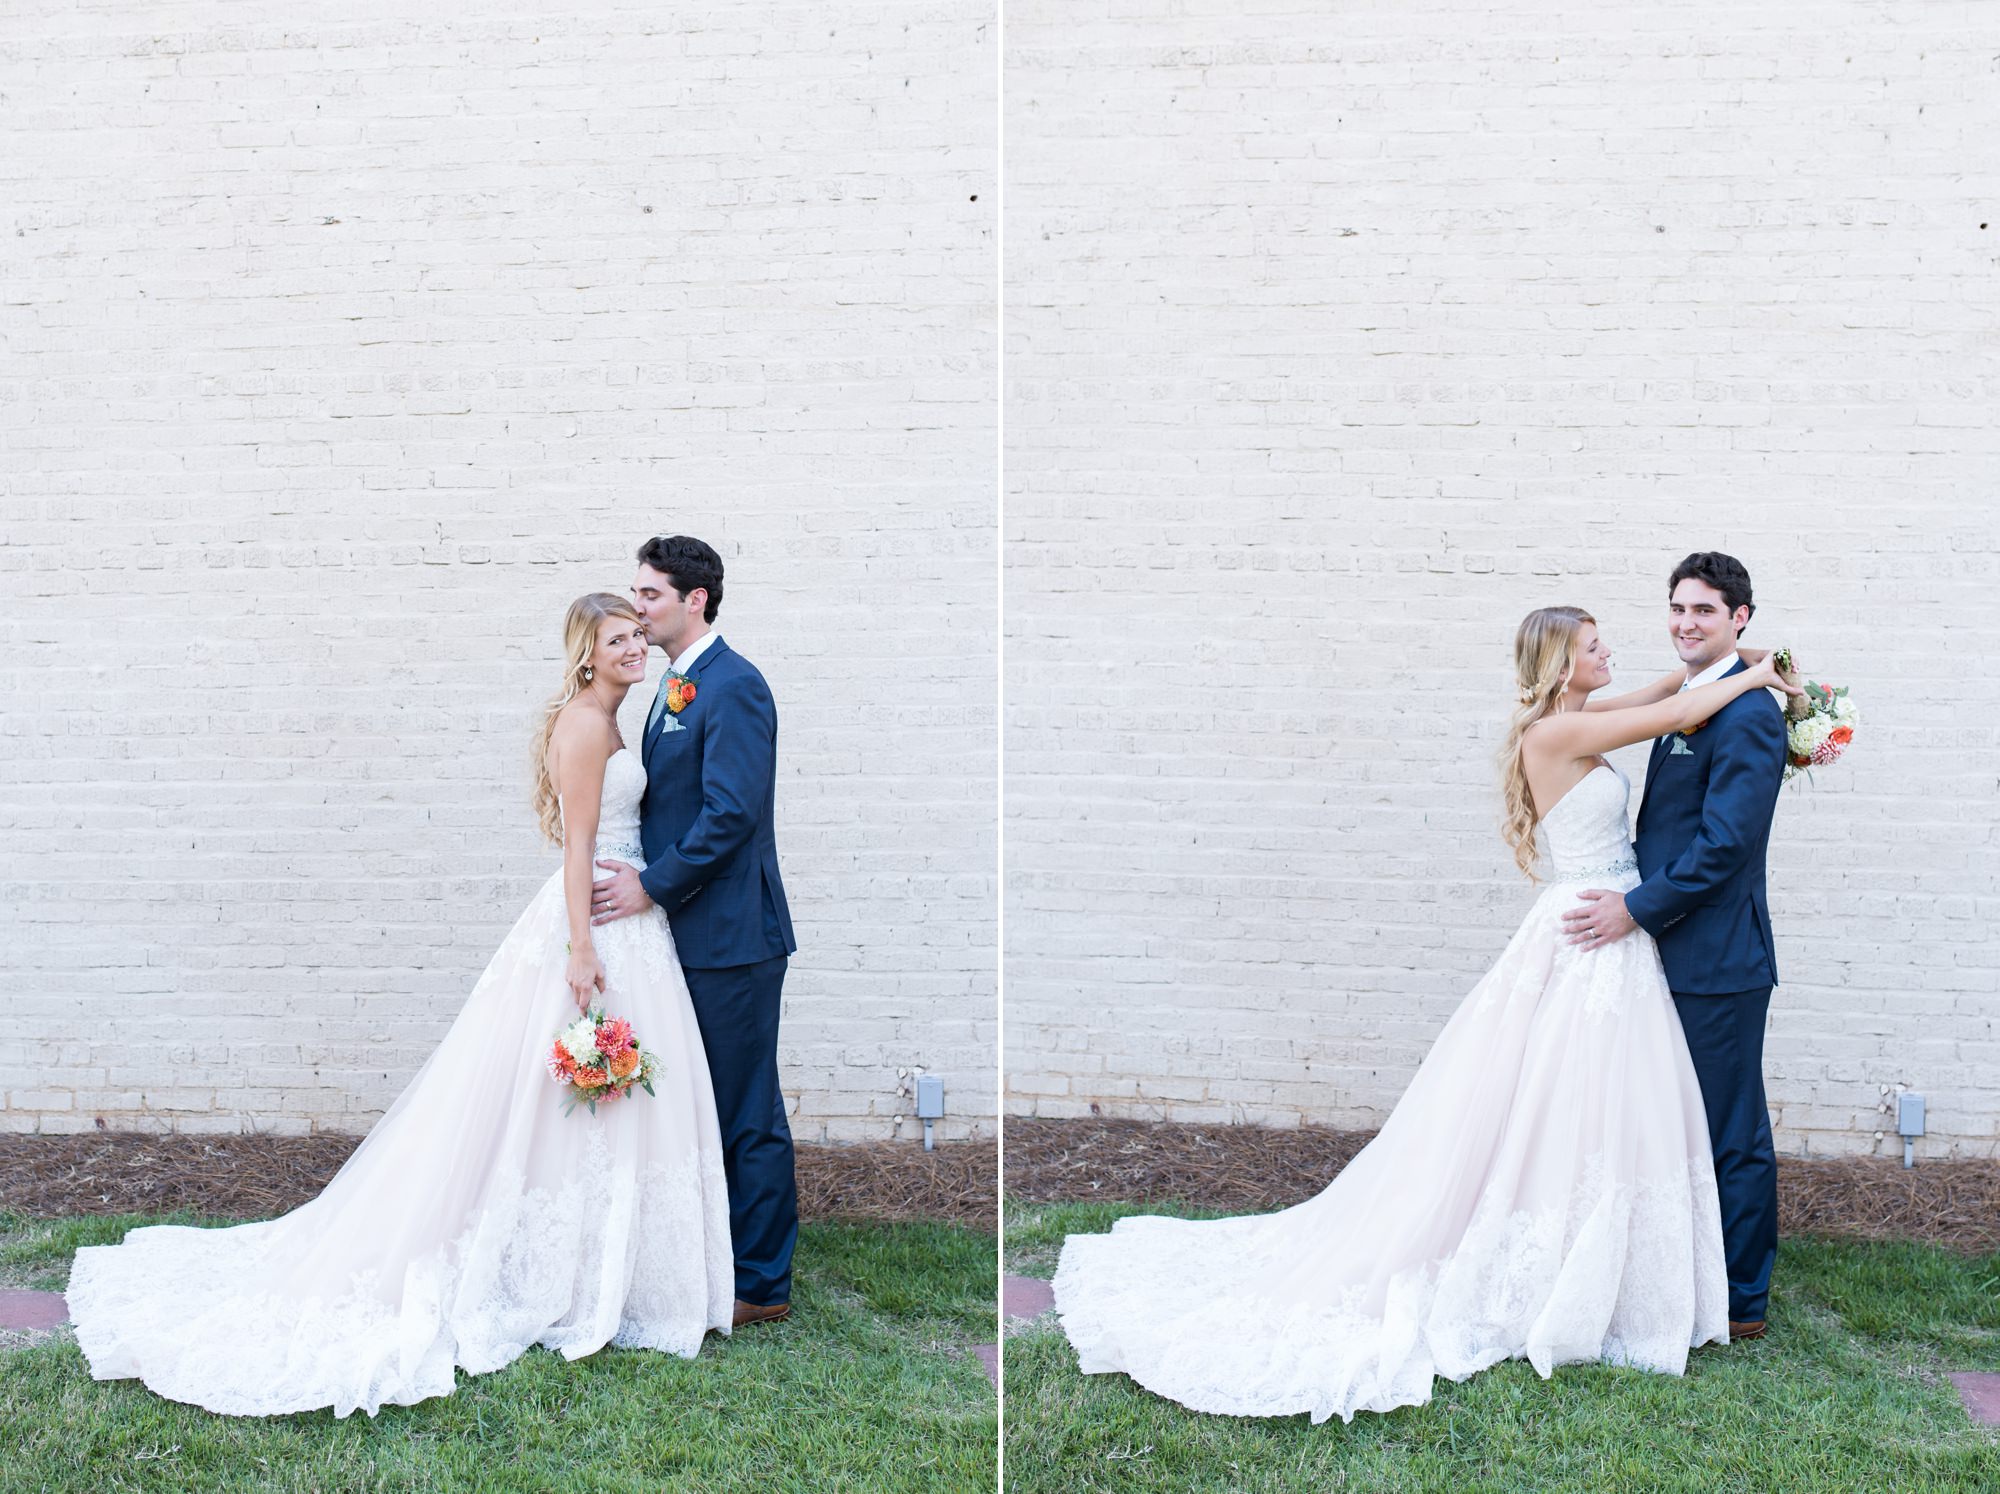 Kelly + Mike | Charlotte Wedding Photographer | A Bottle Factory wedding || Anna Wisjo Photography